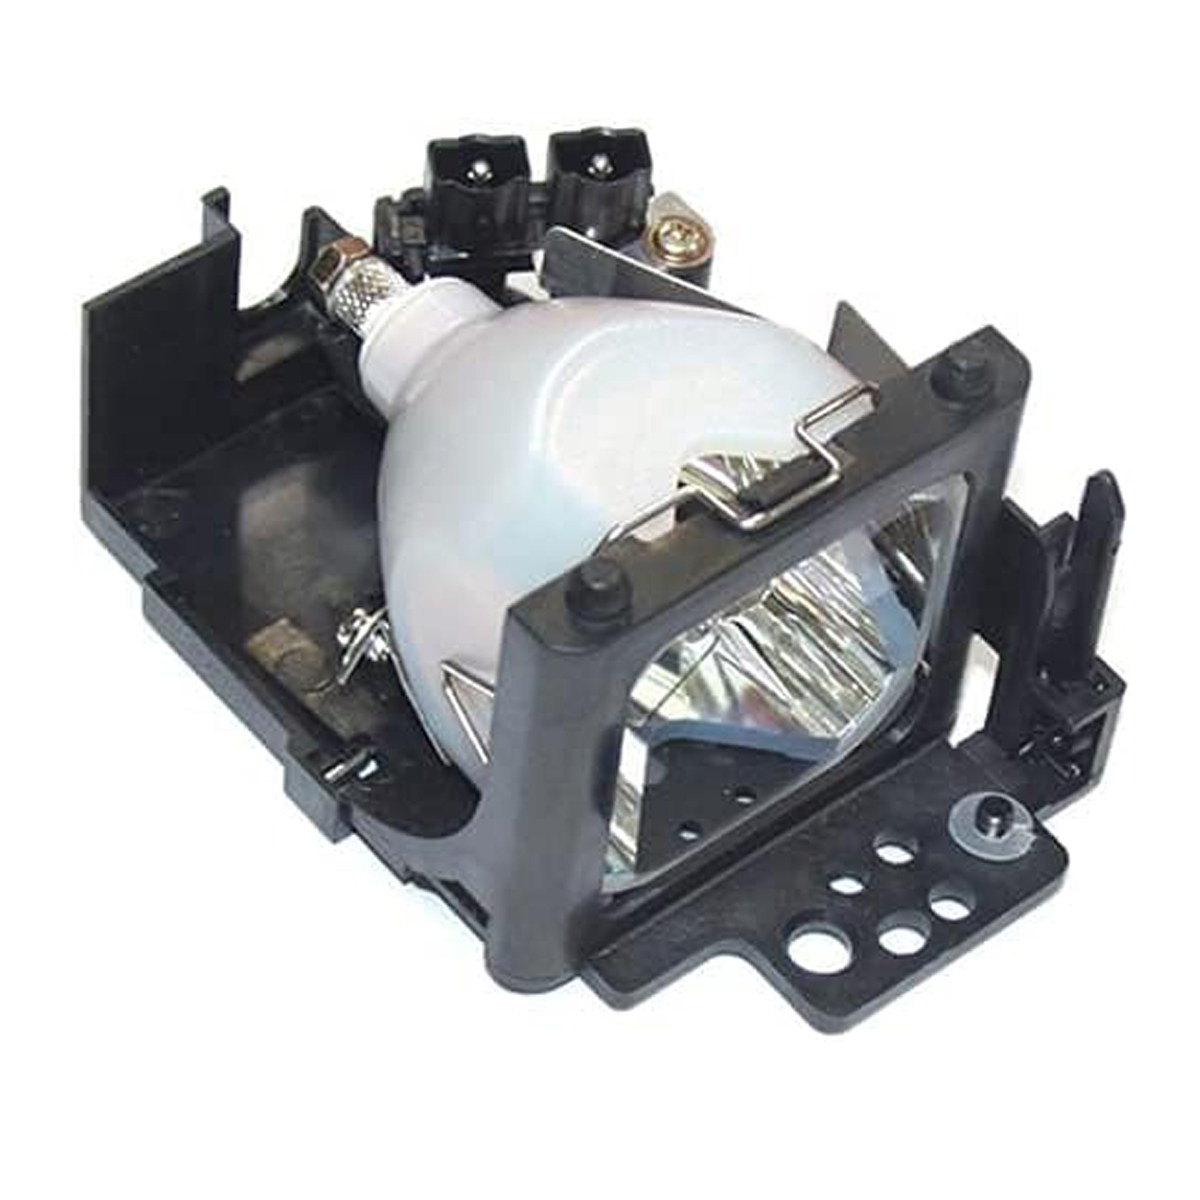 Replacement Projector lamp 456-224 For Dukane Projector